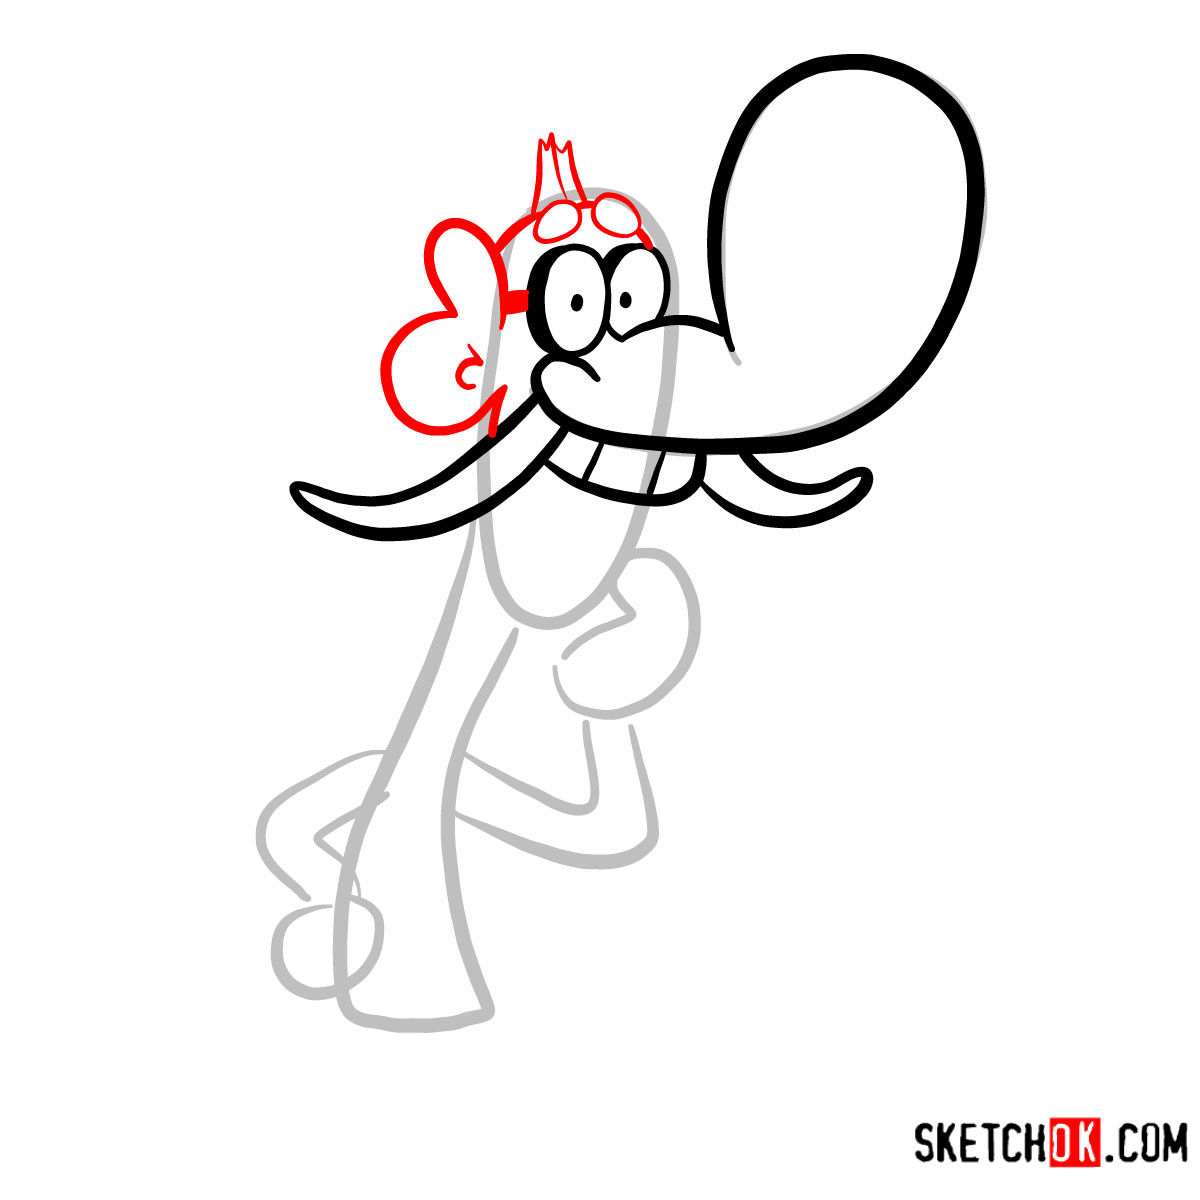 How to draw Mung Daal from Chowder series - step 04